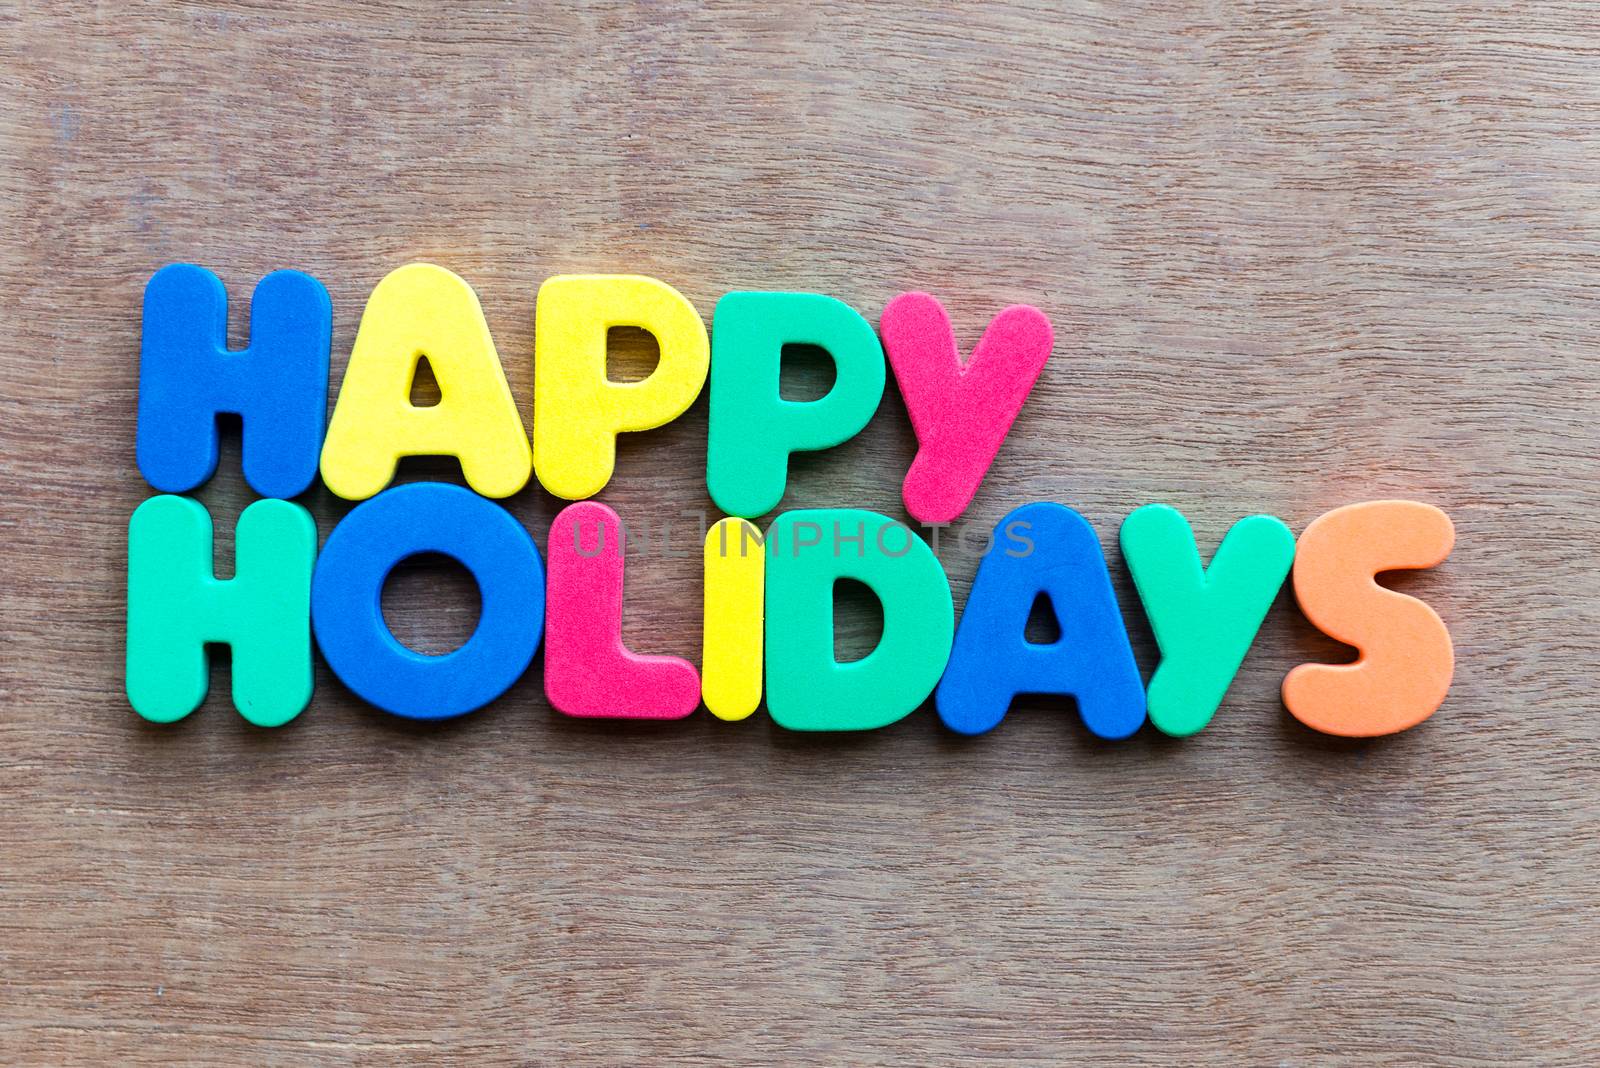 happy holidays words in wood background by sohel.parvez@hotmail.com